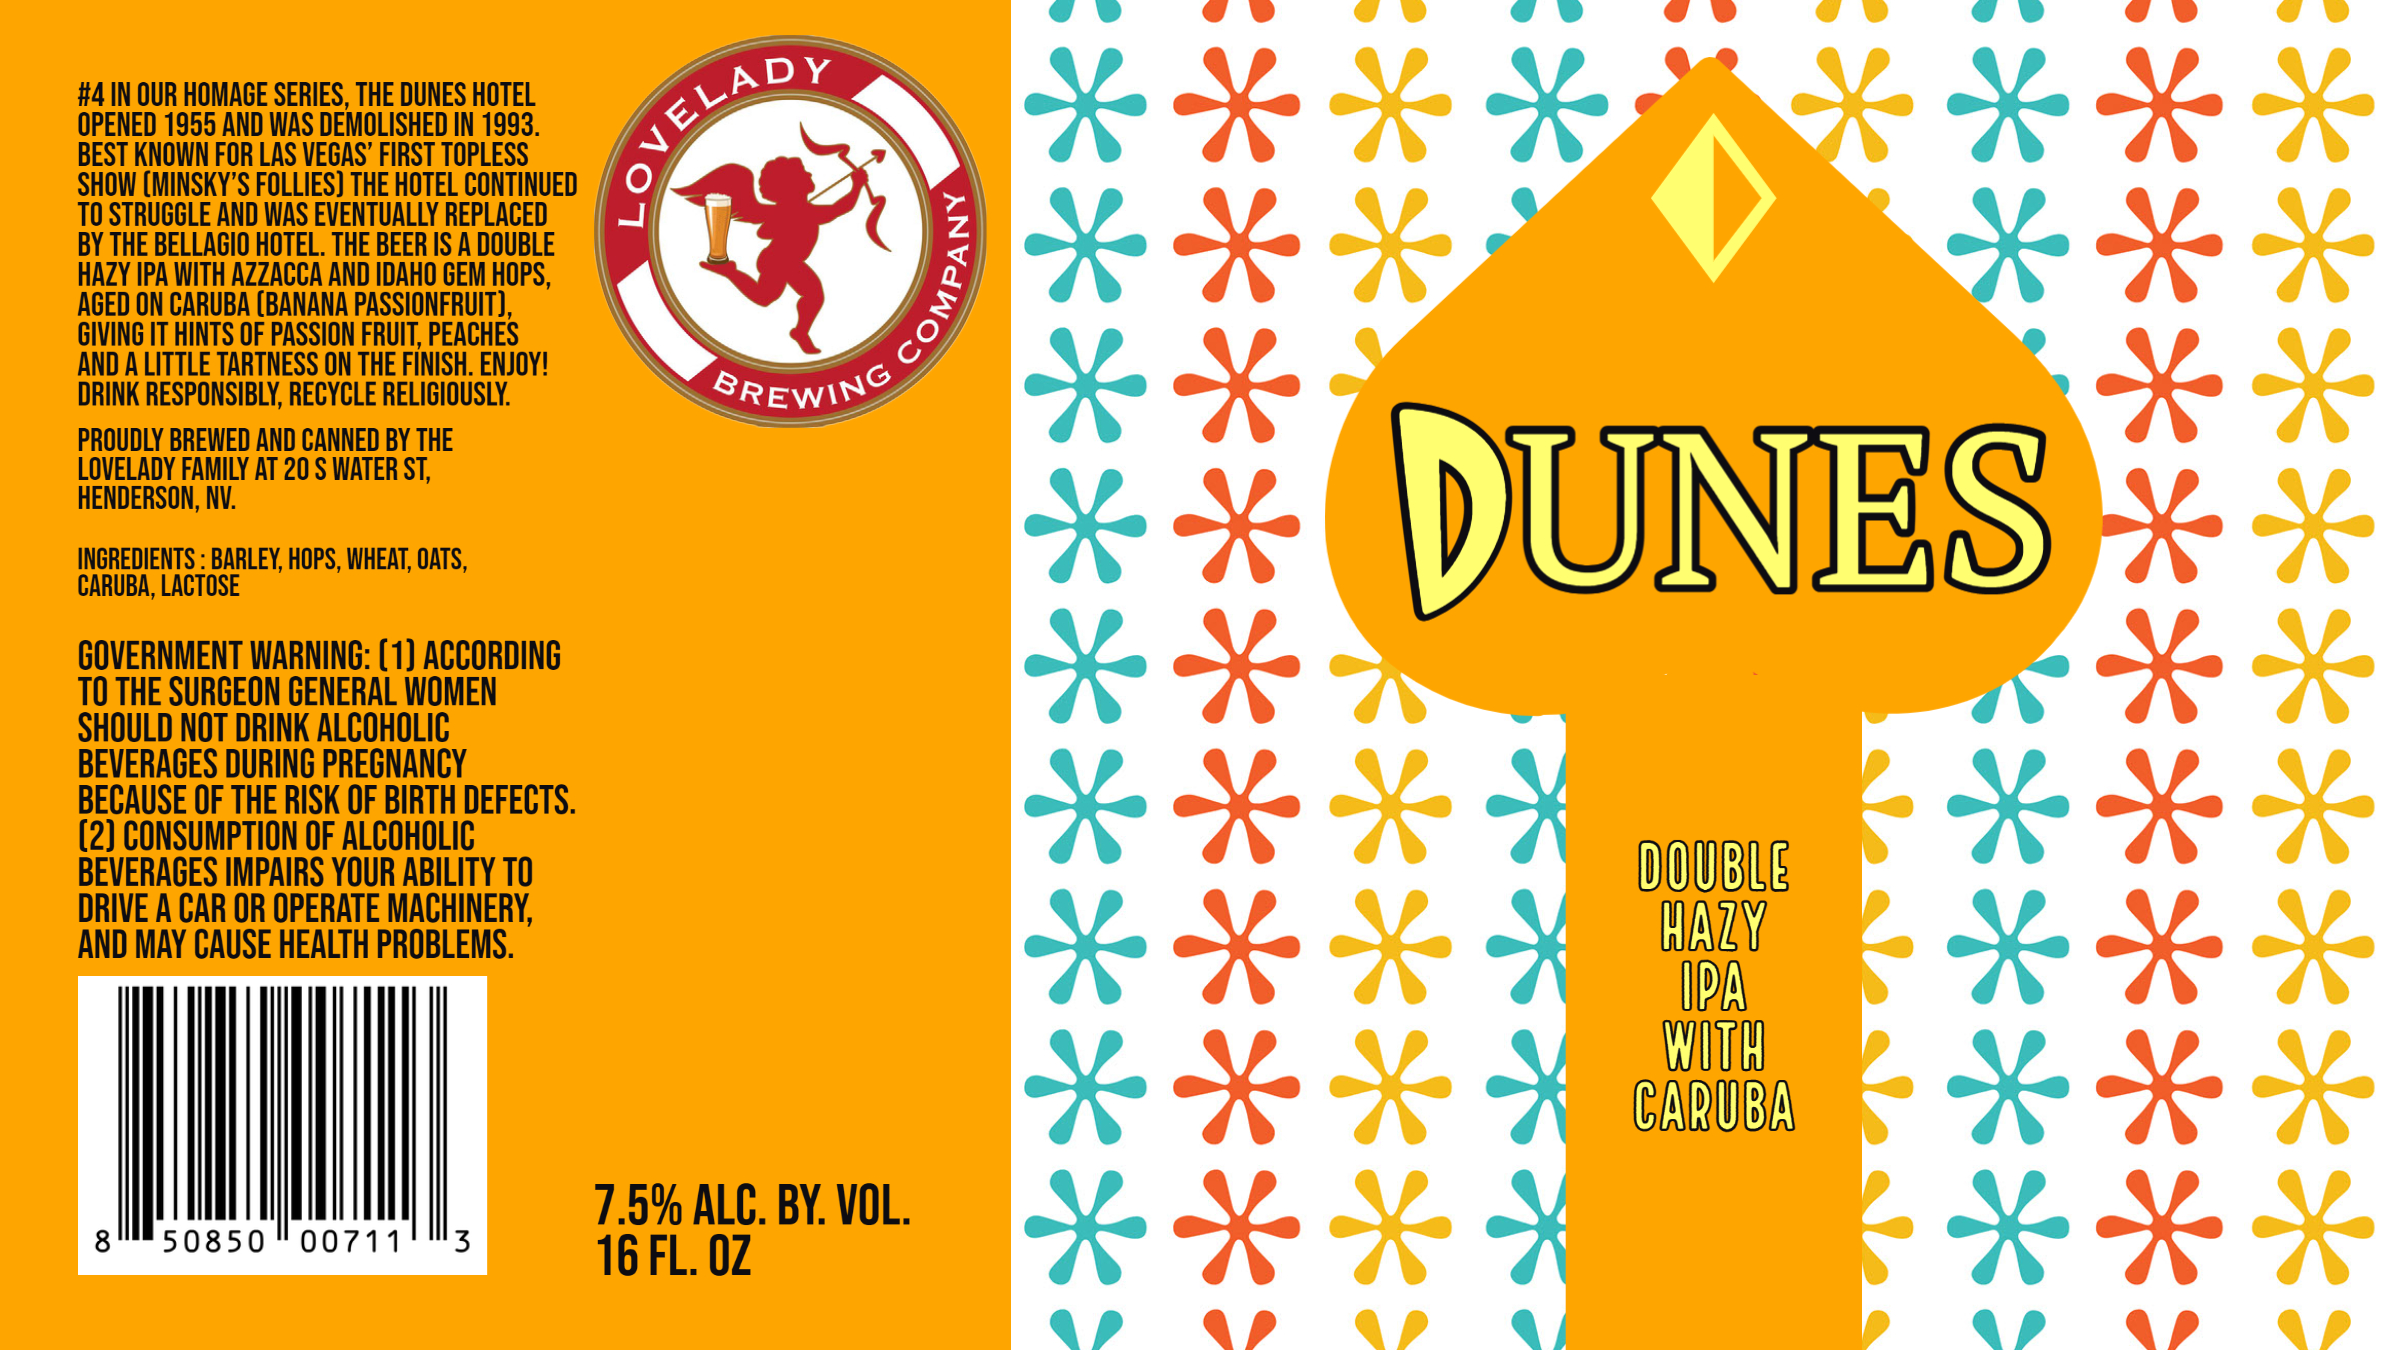 Dunes from Dead Casino Series by Lovelady Brewing - packaging with old Las Vegas Dunes sign colored bright yellow and orange 